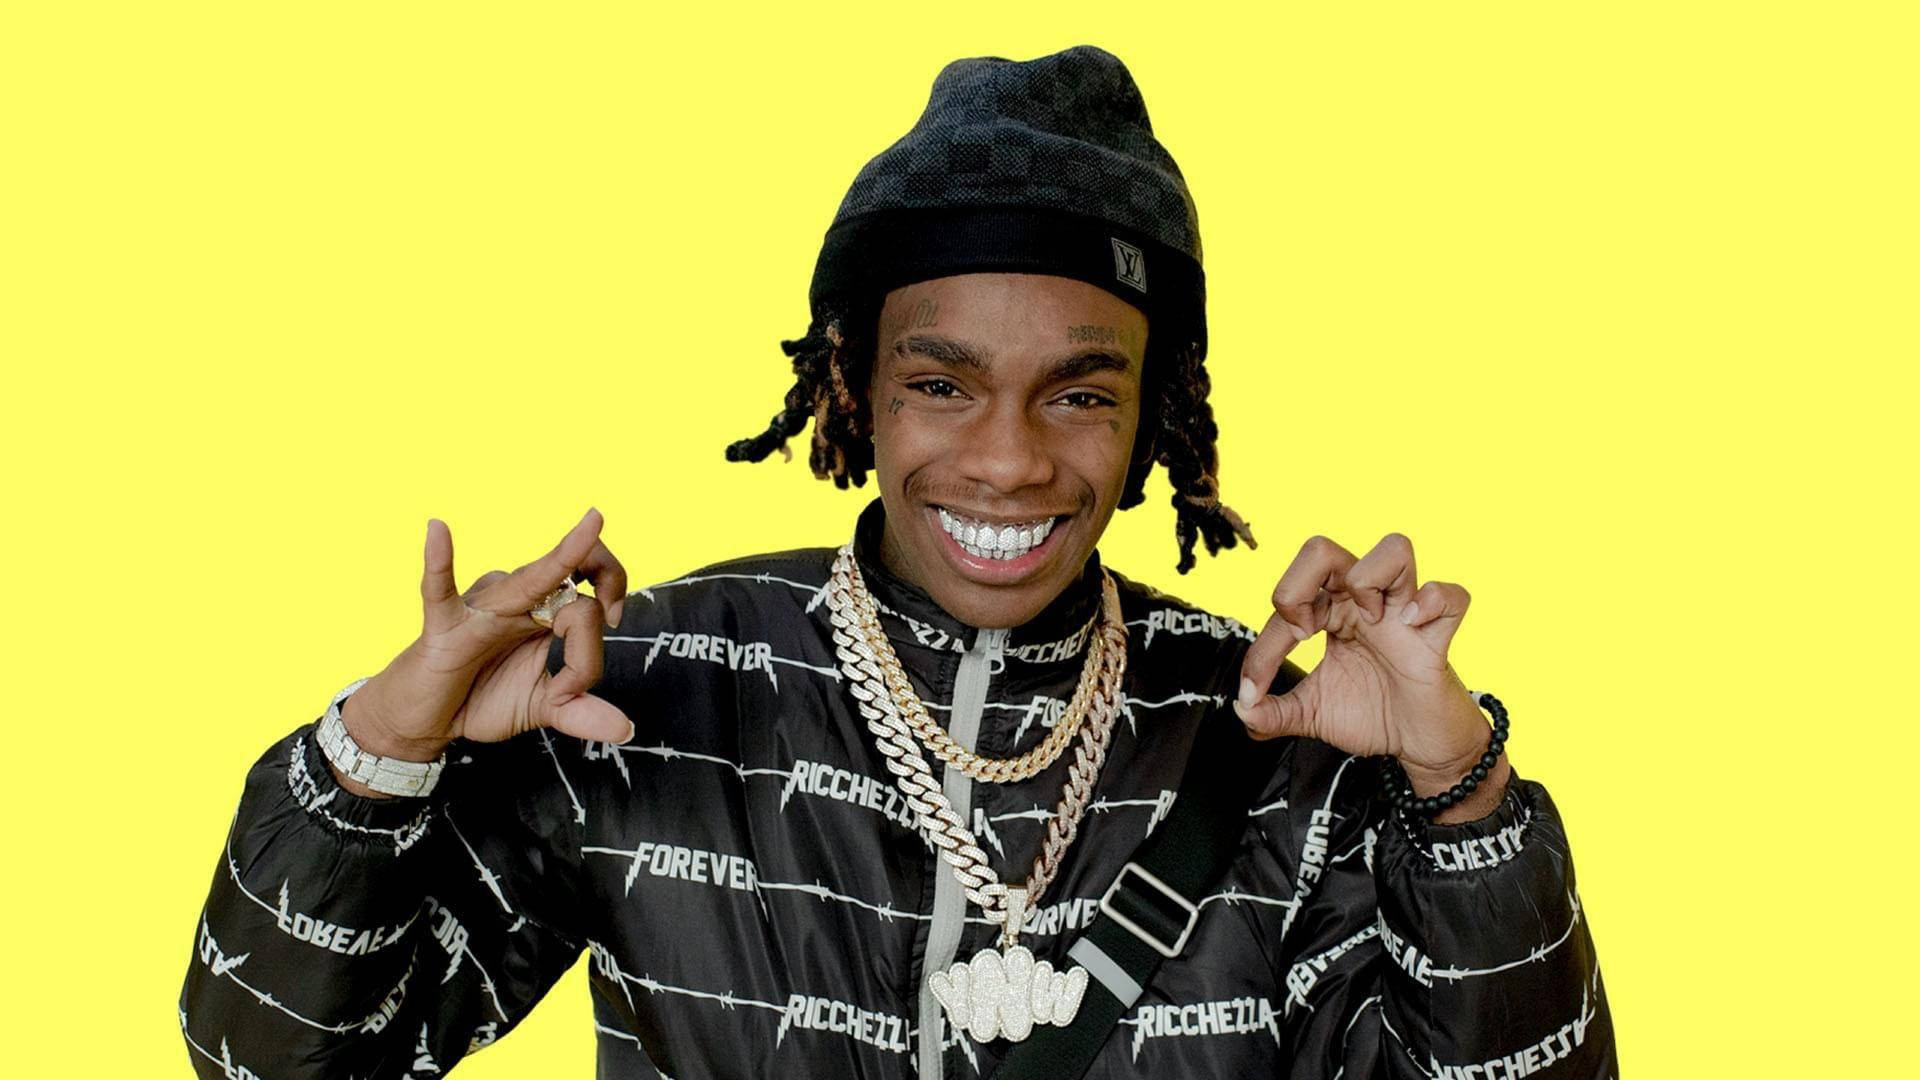 5120X2880 Ynw Melly Wallpaper and Background